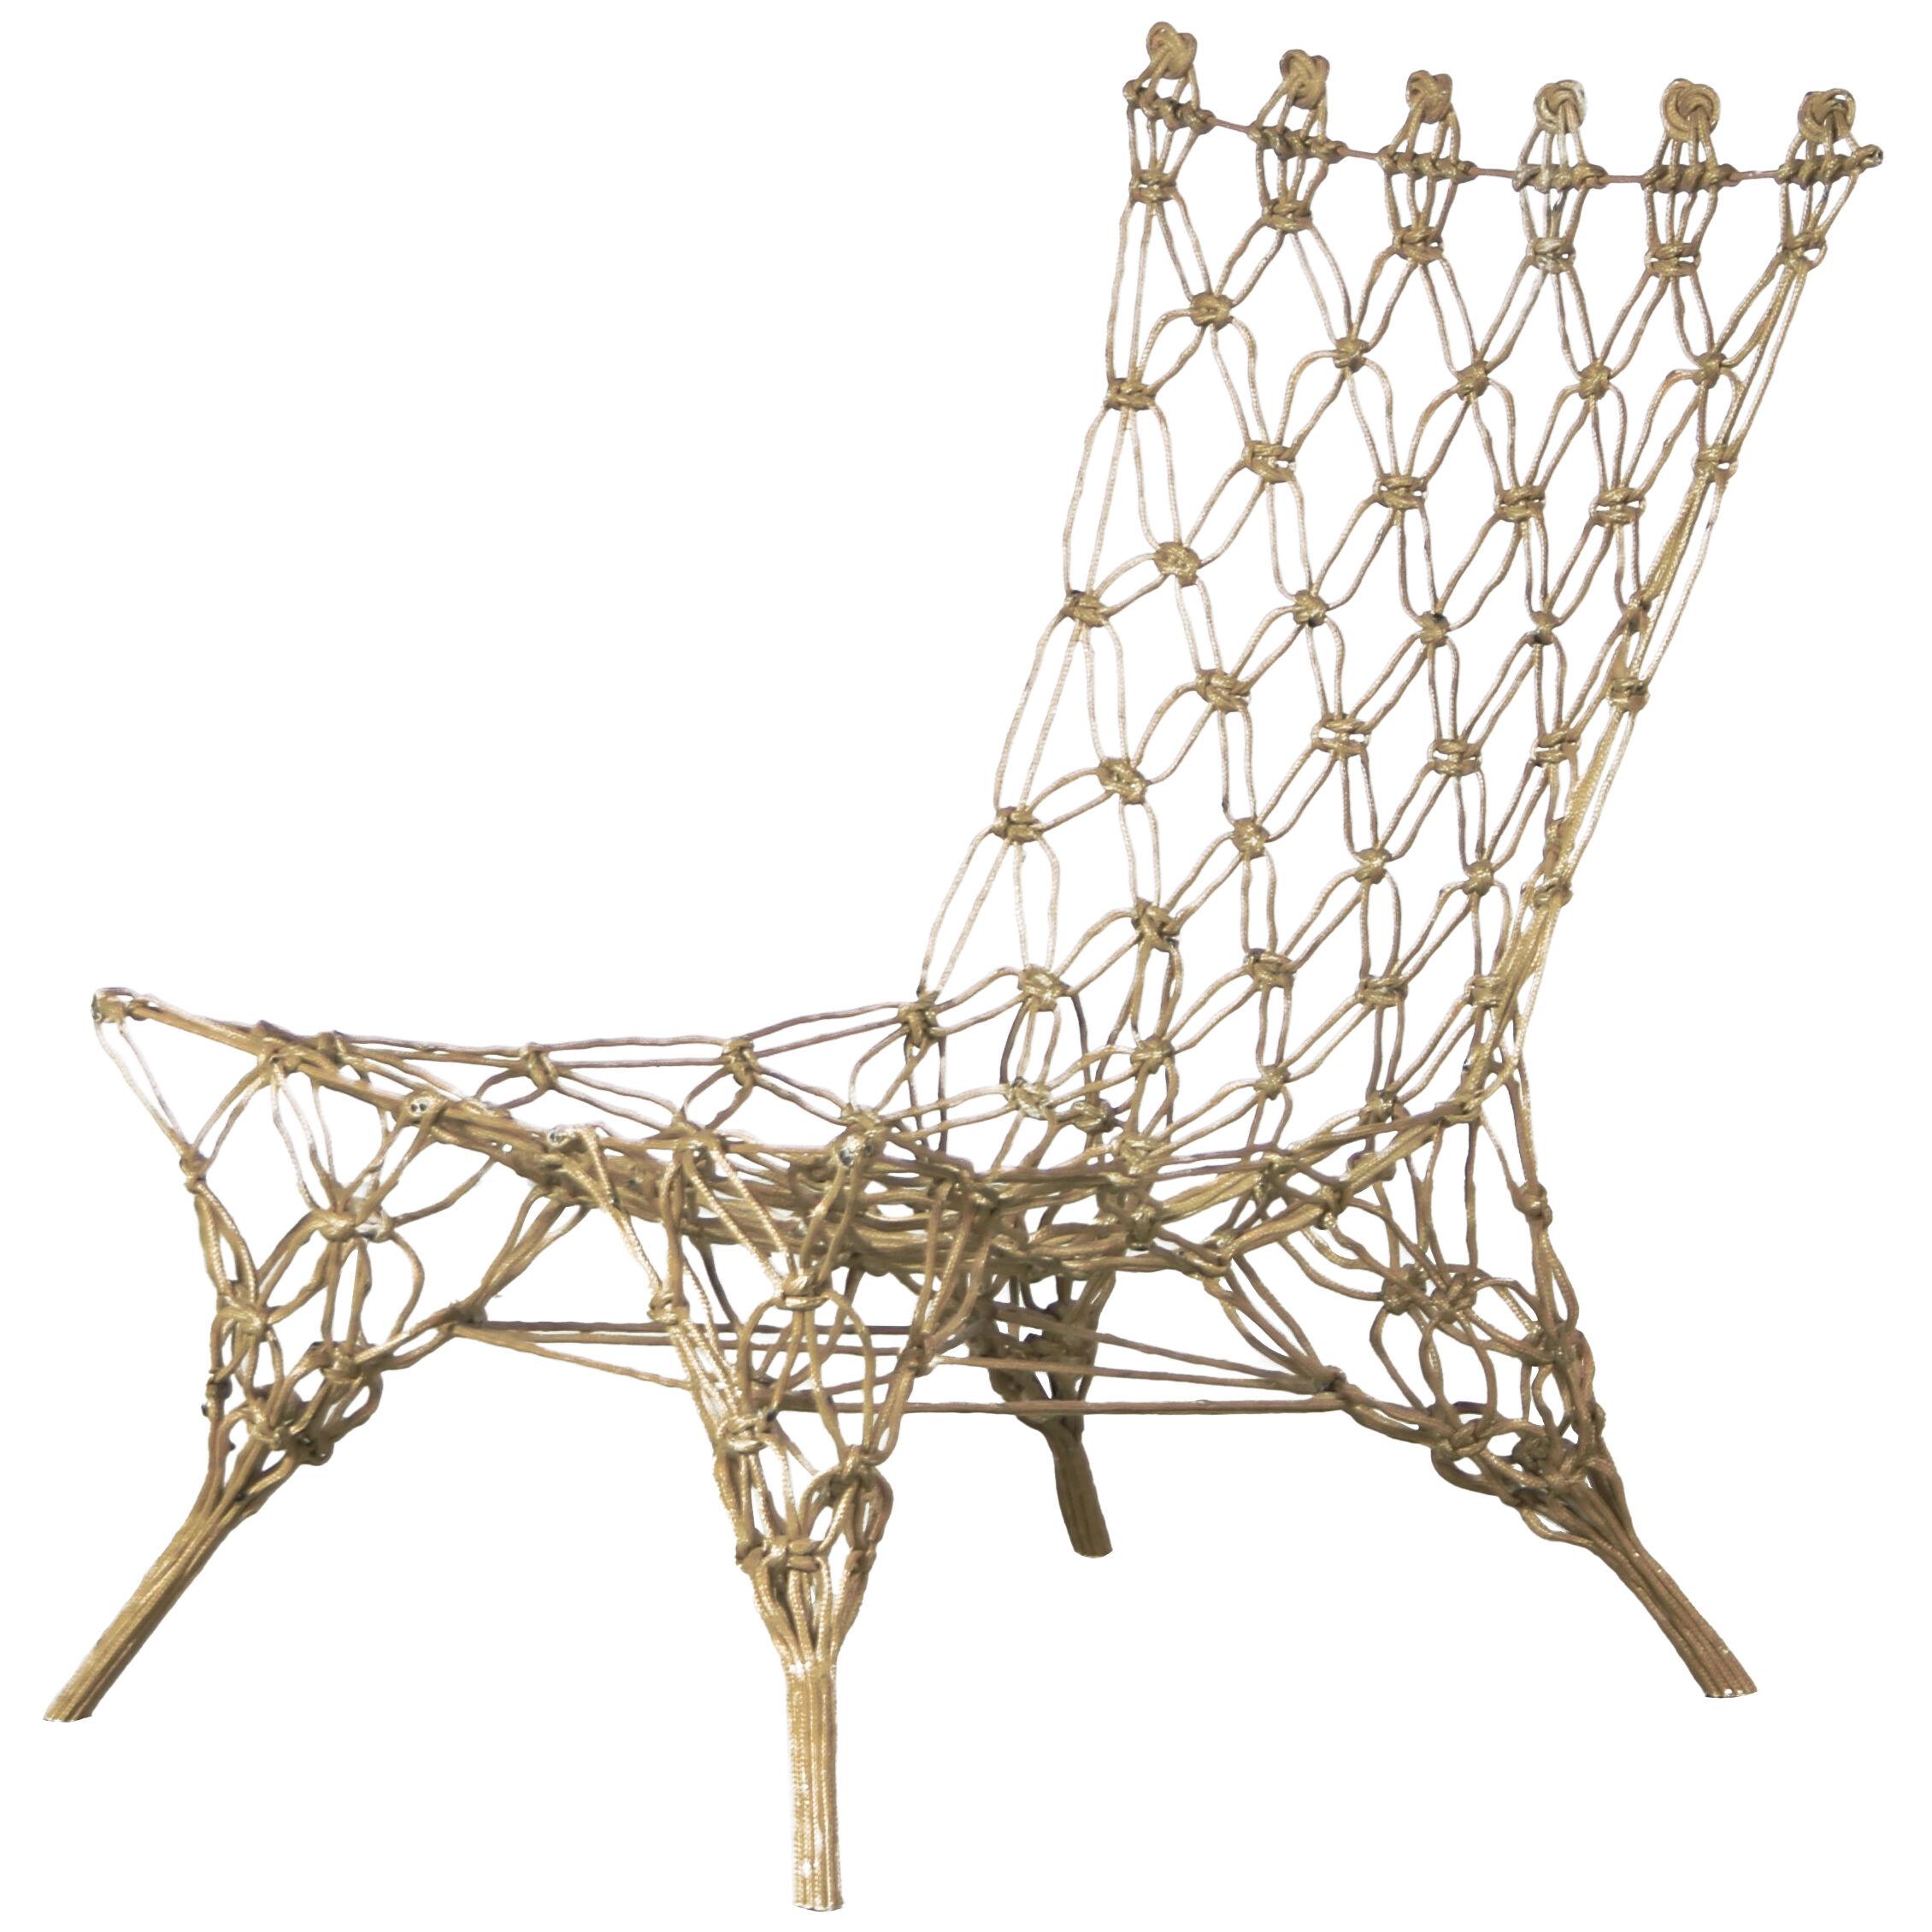 “Knotted” Chair by Marcel Wander for Droog Design, Netherlands 1990